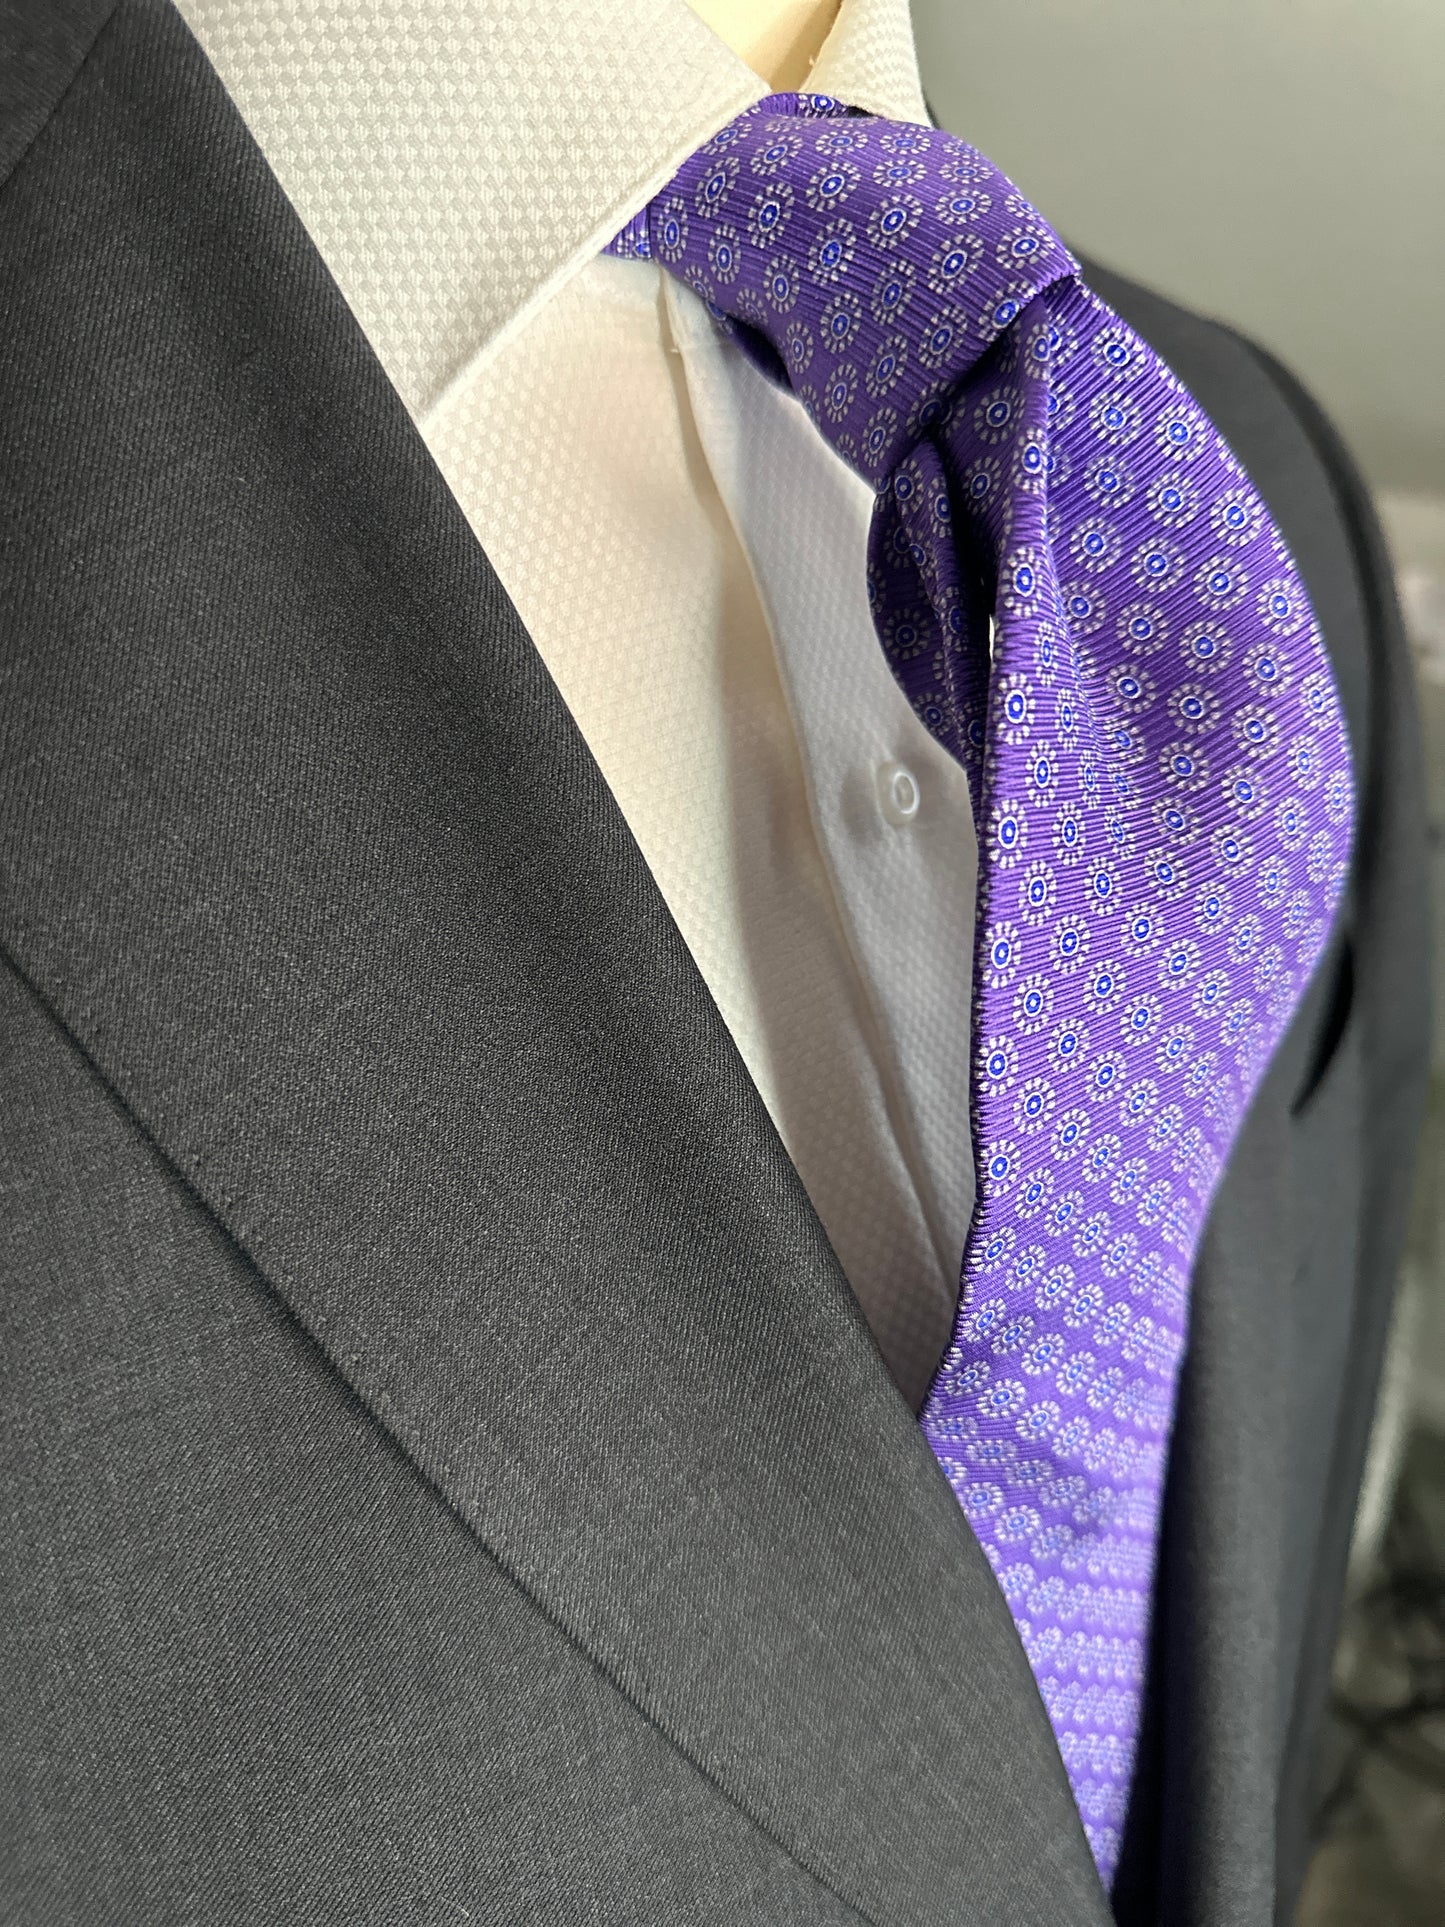 A beautiful light weight silk twill tie, perfect for those spring summer events on weekends and those special business meetings. The light purple or lavender color exudes luxurious and sophisticated elegance with any suit or jacket. Put this tie with a white shirt and navy blue blazer for a timeless look. 